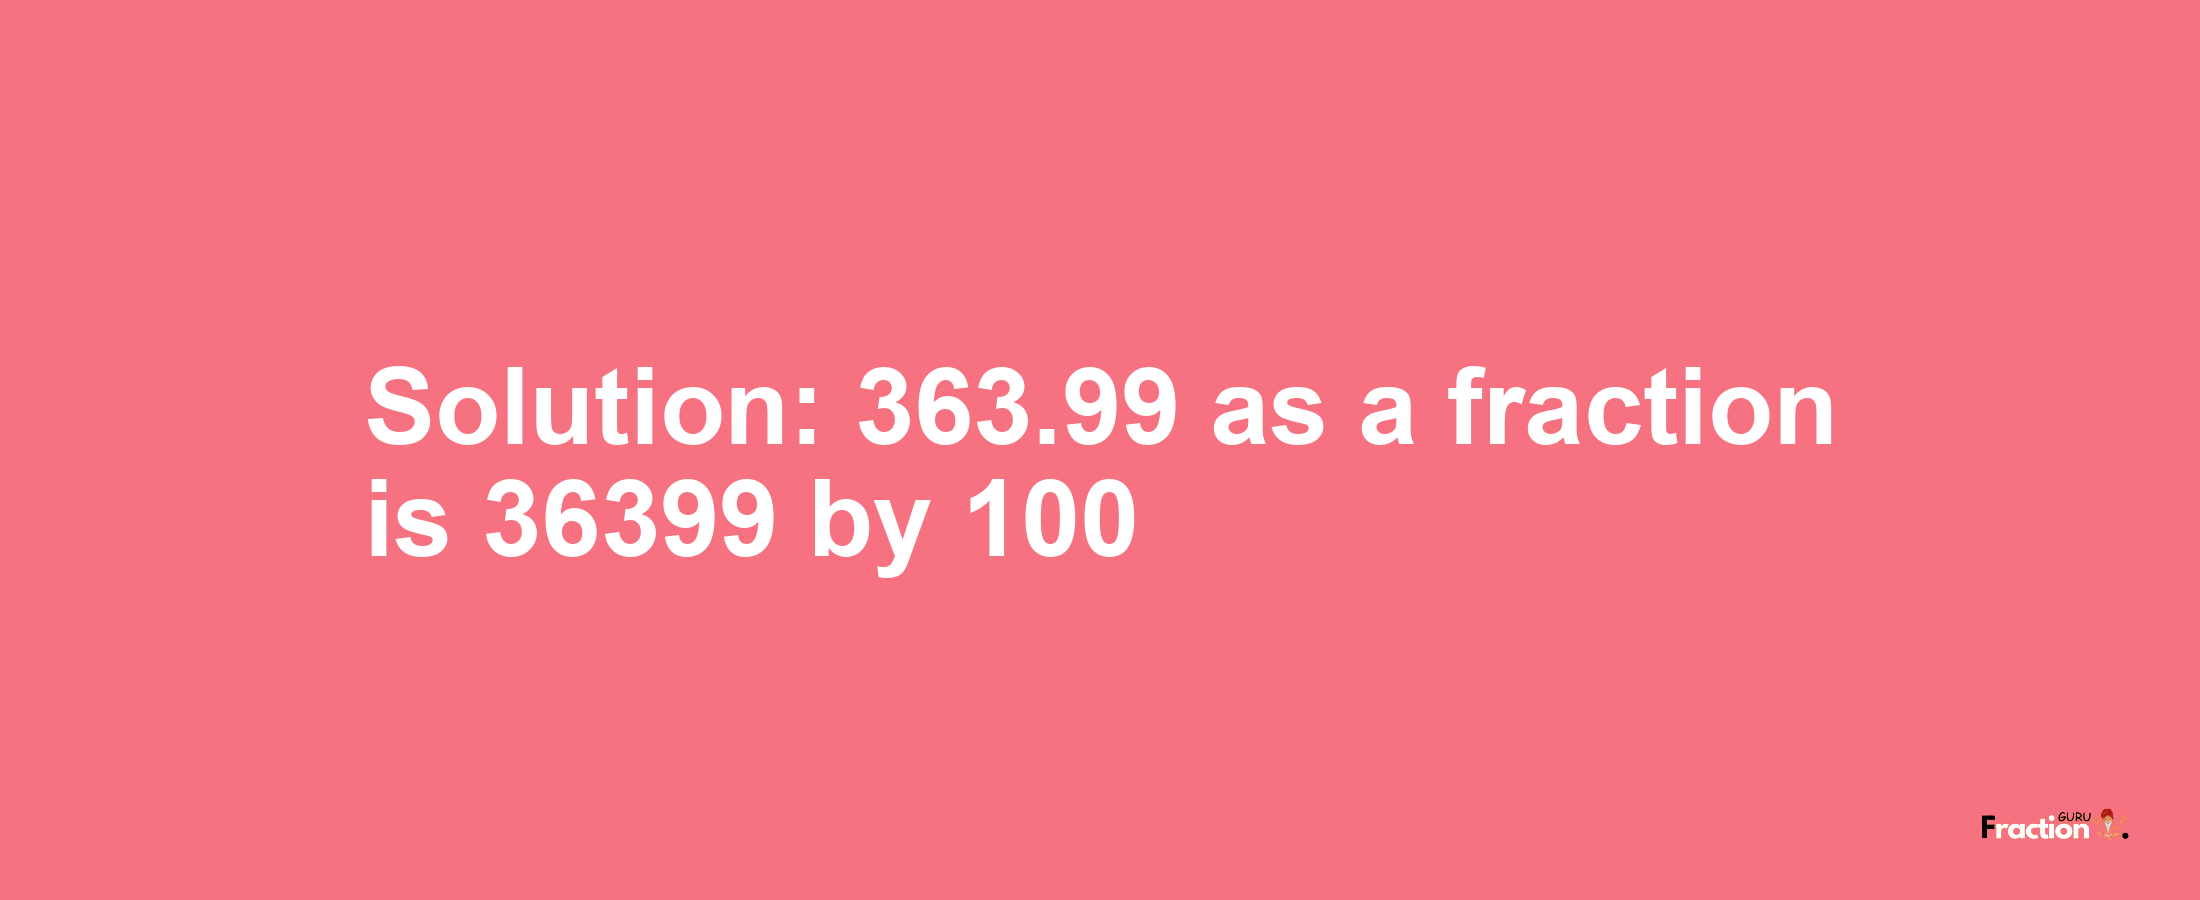 Solution:363.99 as a fraction is 36399/100